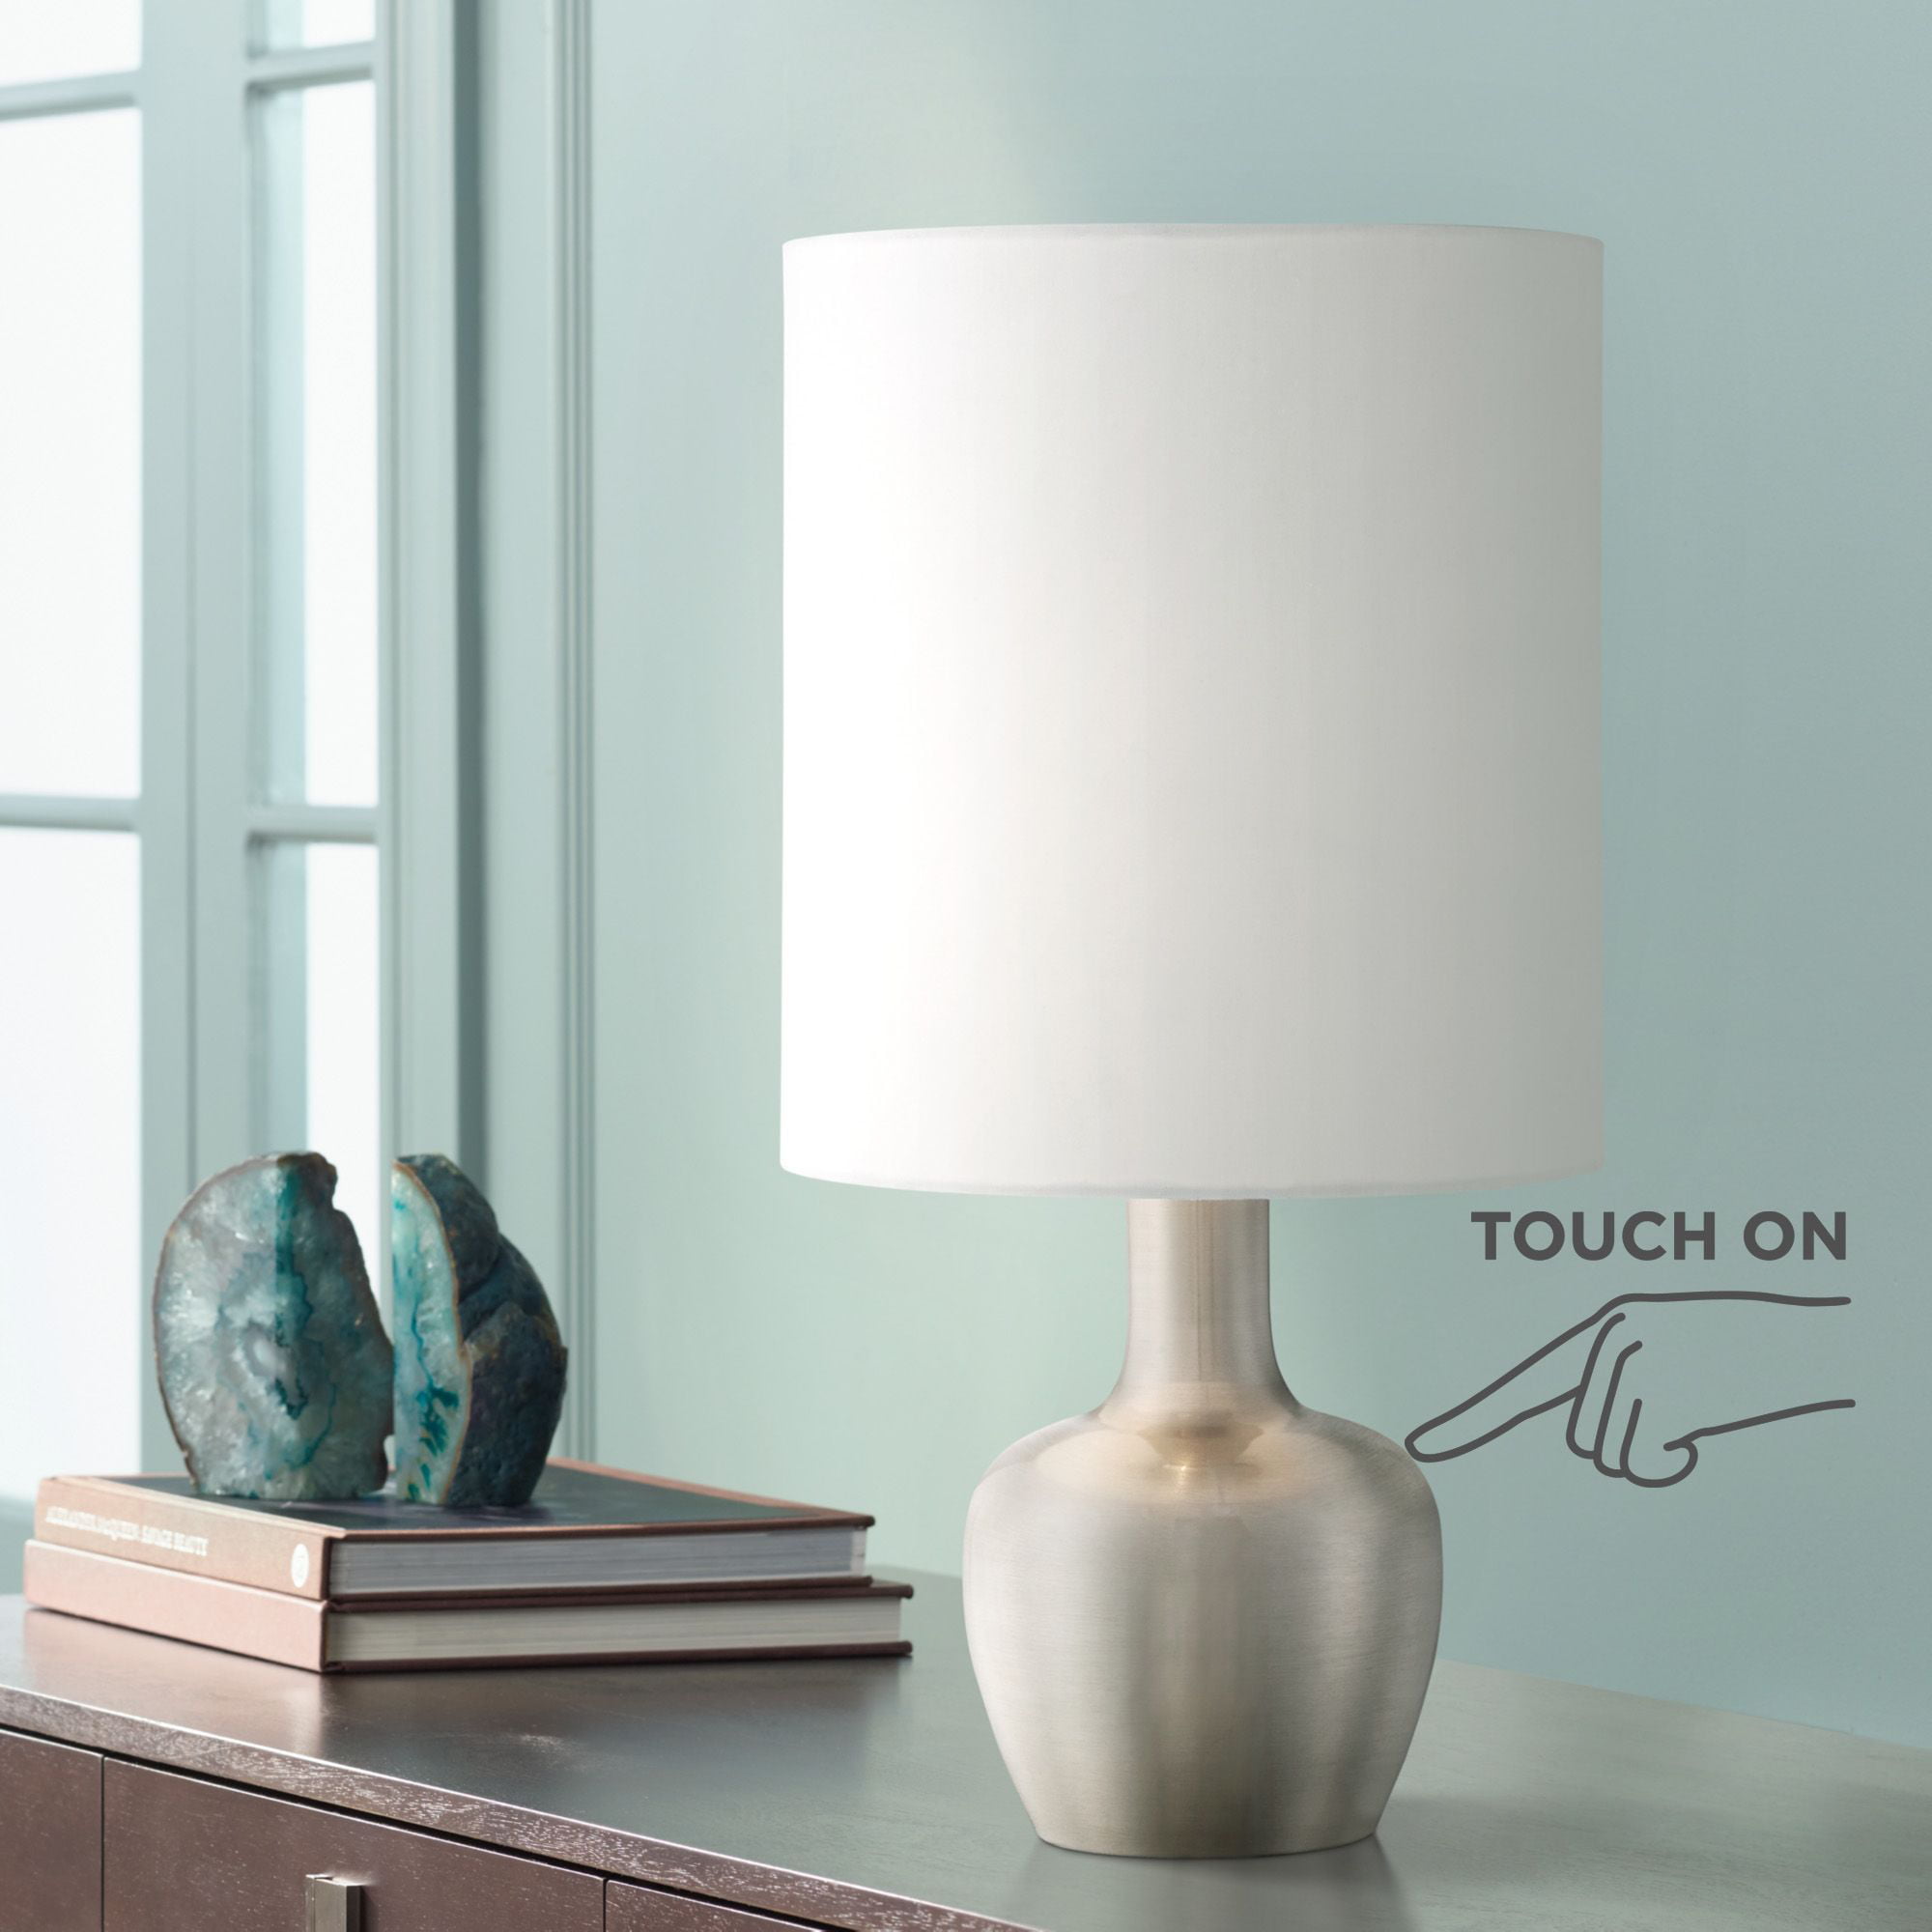 H Contempo Deluxe 3-Way Table Touch Lamp-White OK Lighting OK-815PL-SP1 23 in 